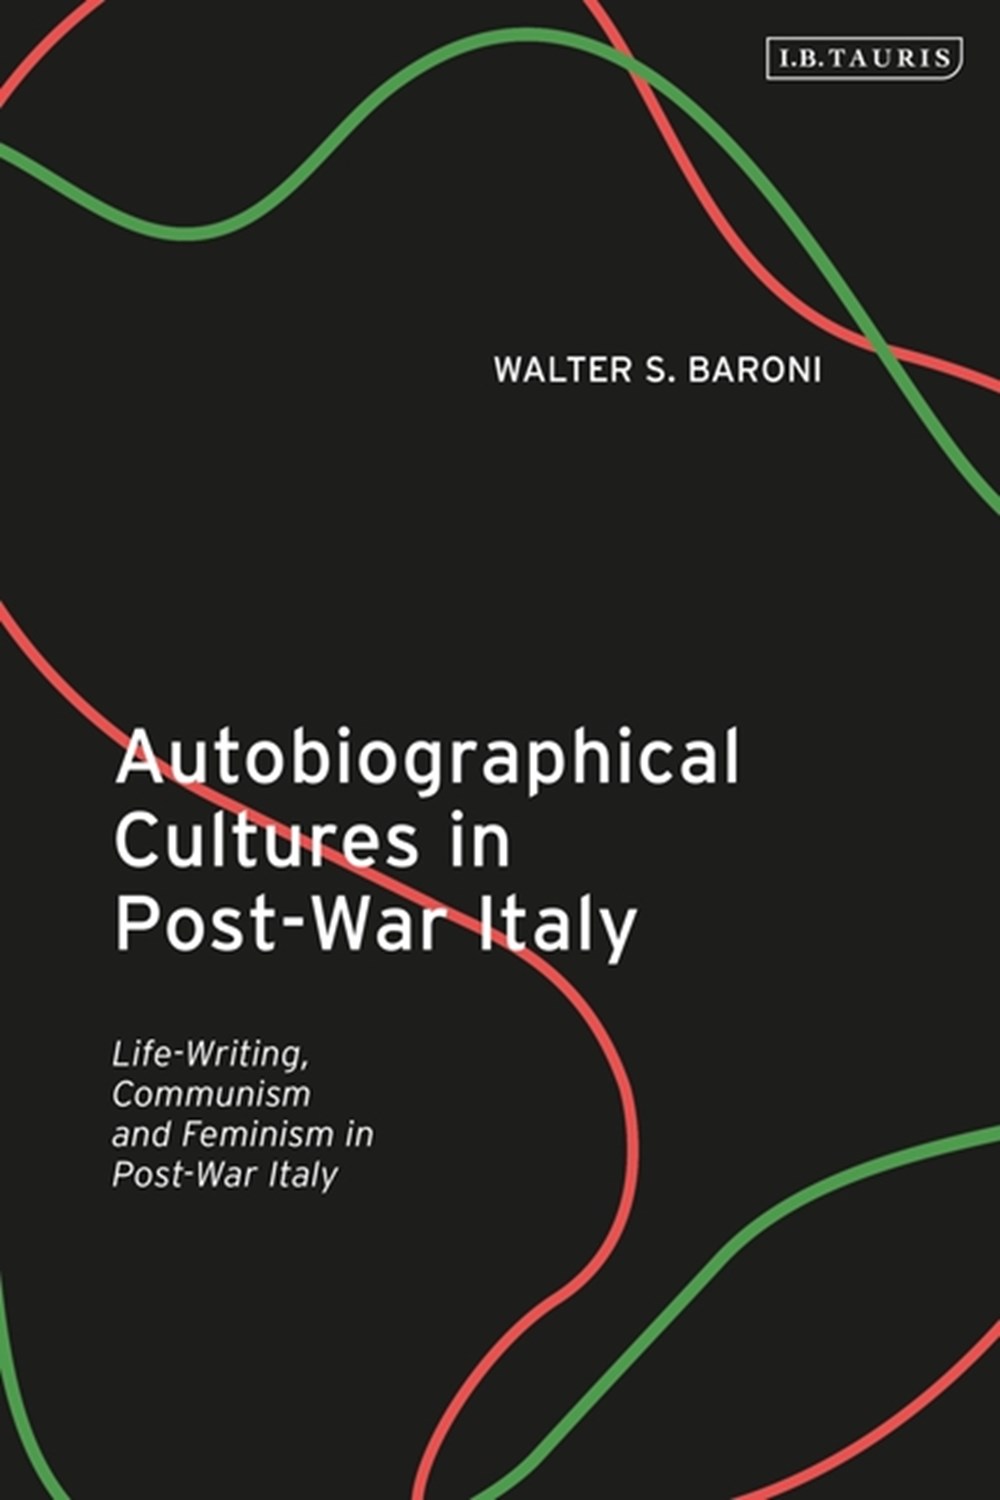 Autobiographical Cultures in Post-War Italy Life-Writing, Communism and Feminism